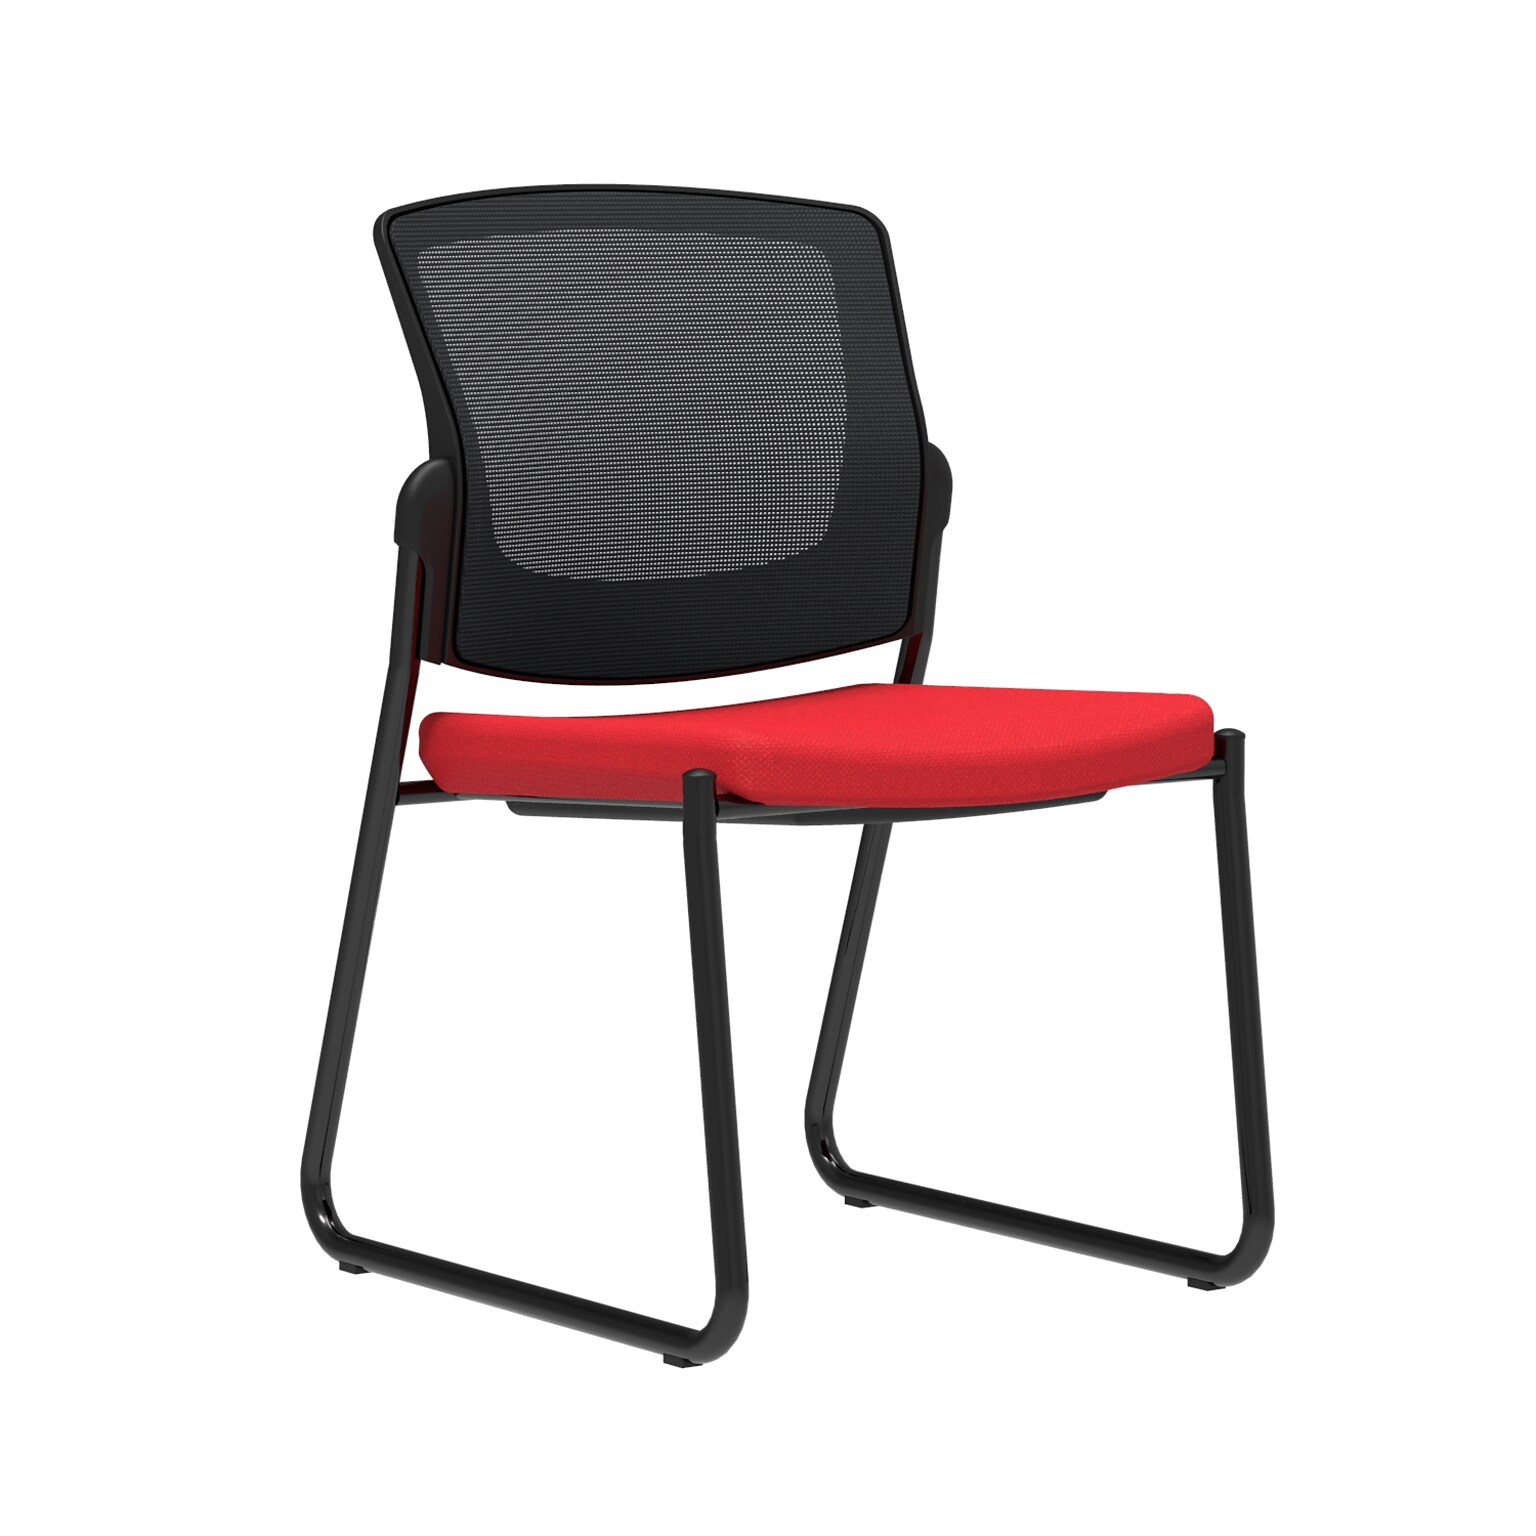 Union & Scale Workplace2.0™ Fabric Guest Chair, Cherry, Integrated Lumbar, Armless, Stationary Seat Control (53734)